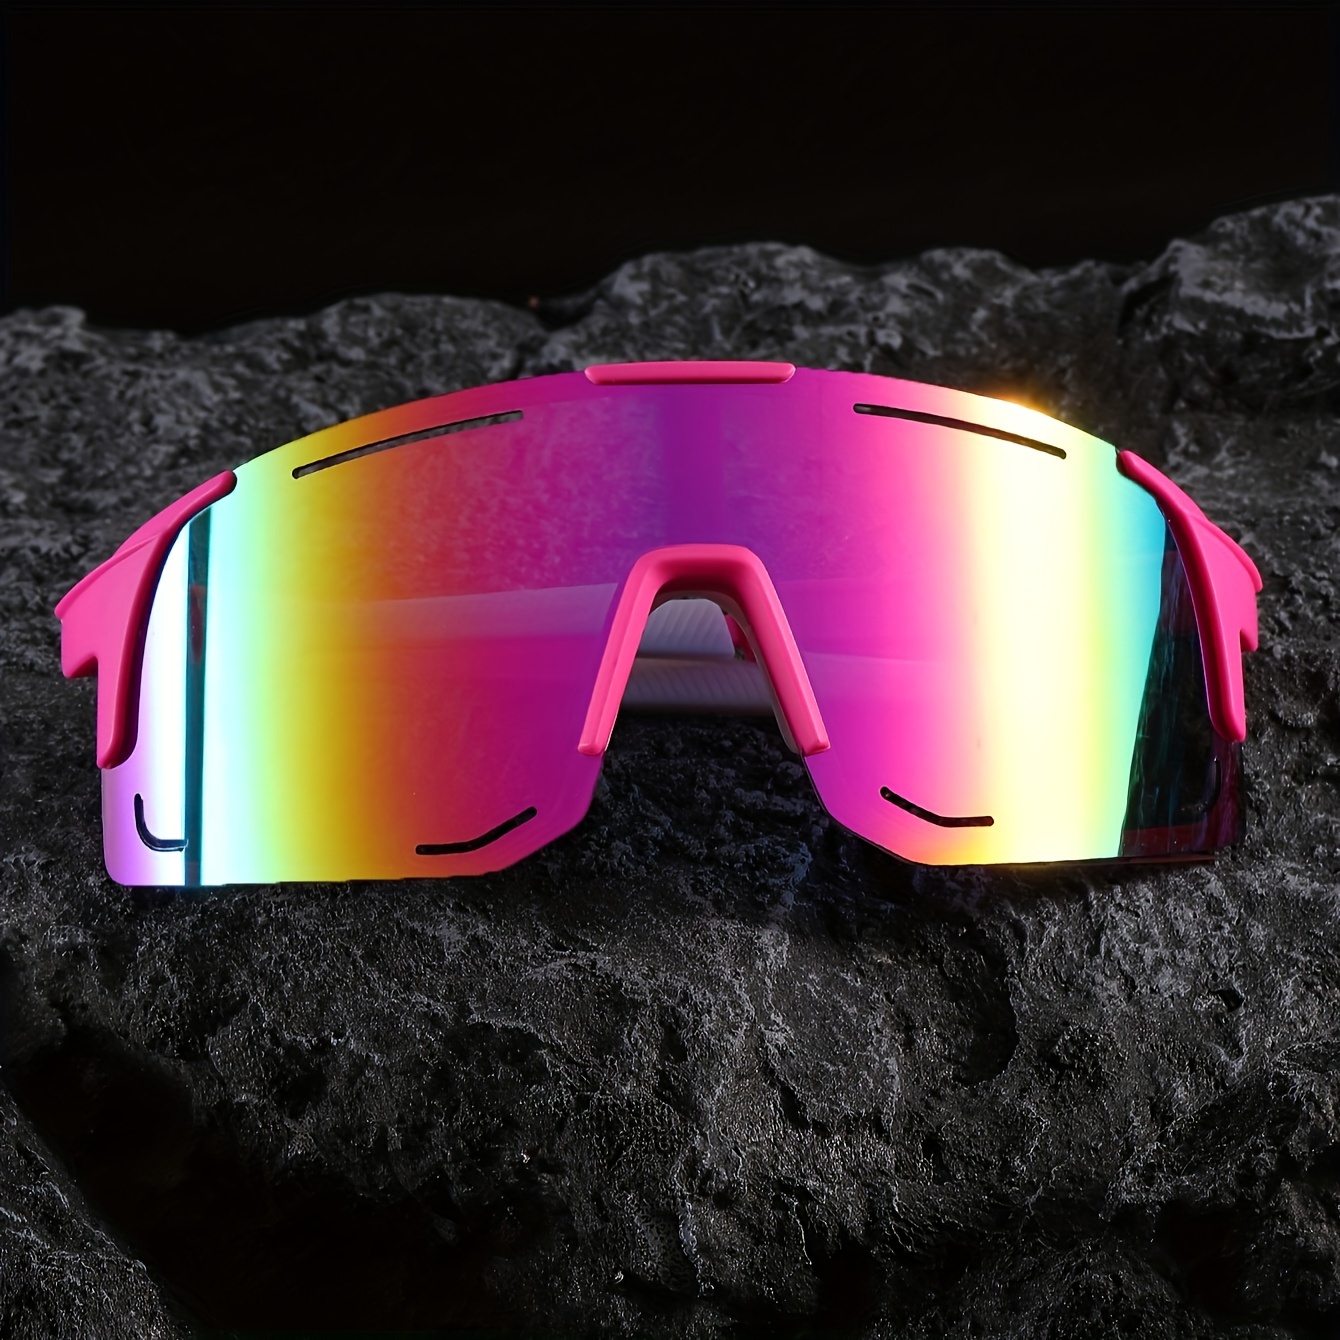 

Unisex Sports Glasses, Y2k Fashion, Iridescent Lenses, Powder-coated Pink Frame, Lightweight & Durable, Ideal For Runners And Outdoor Activities